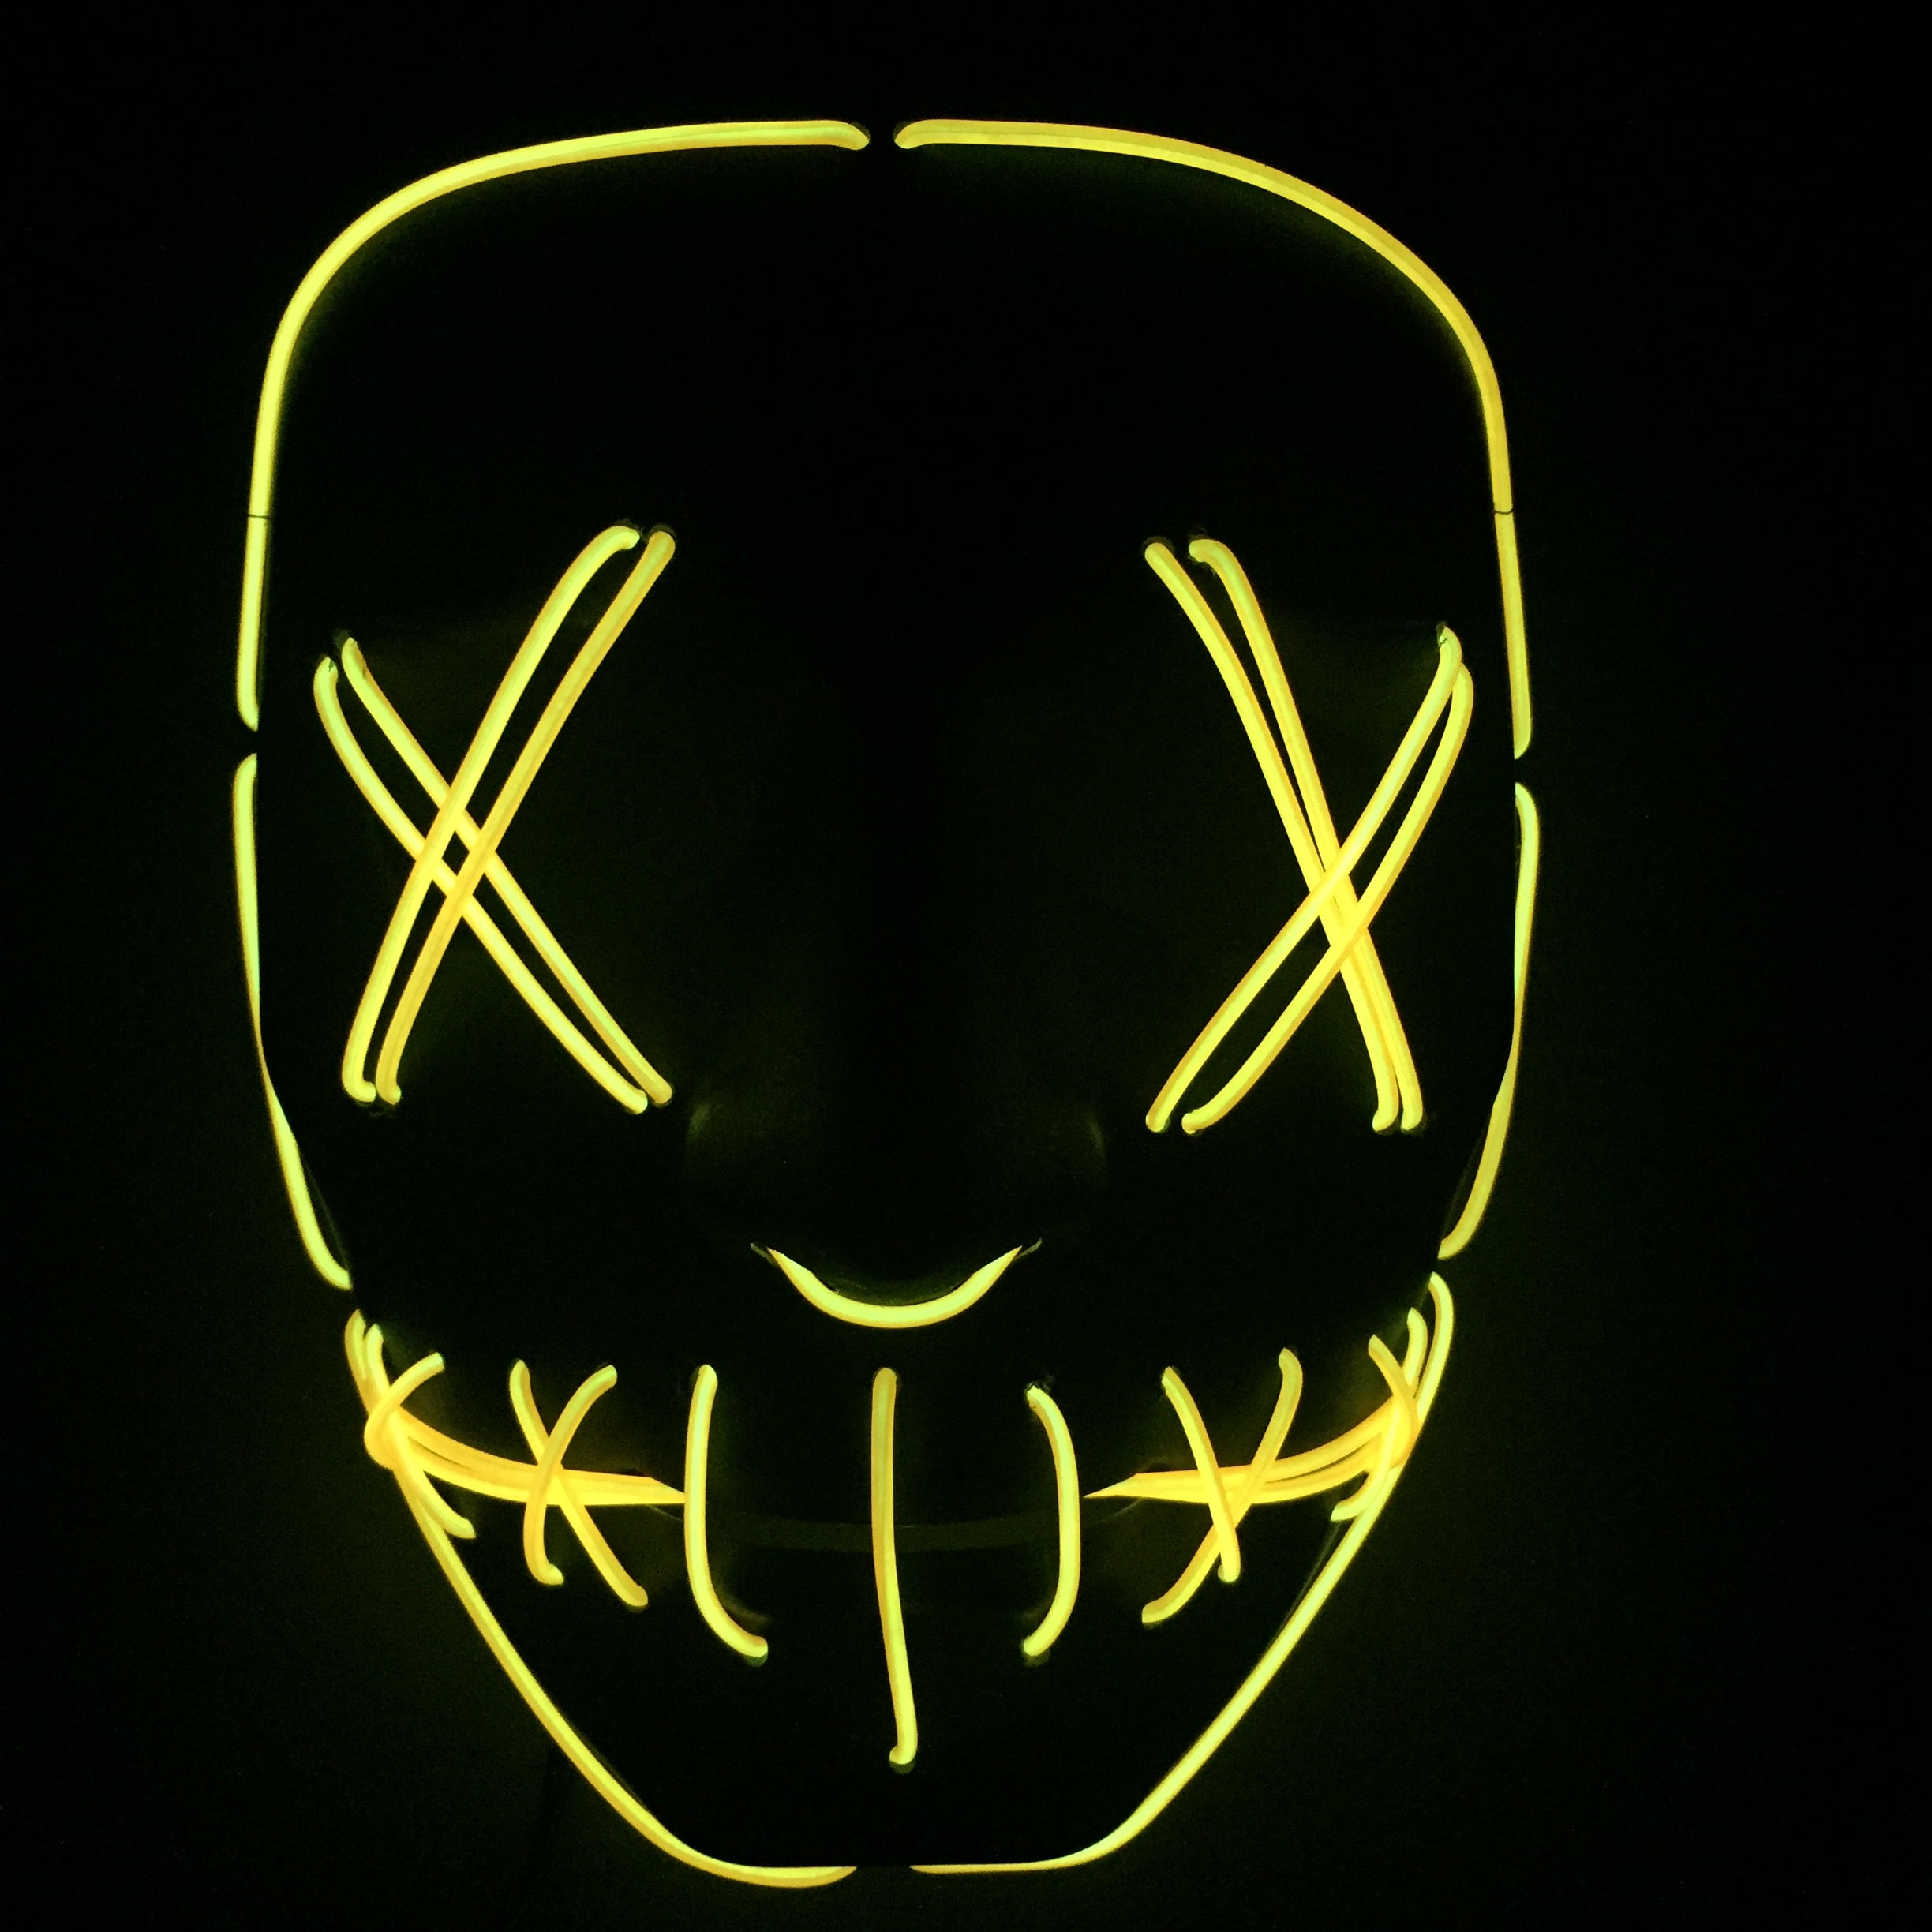 Halloween Led Glowing Full Face Mask